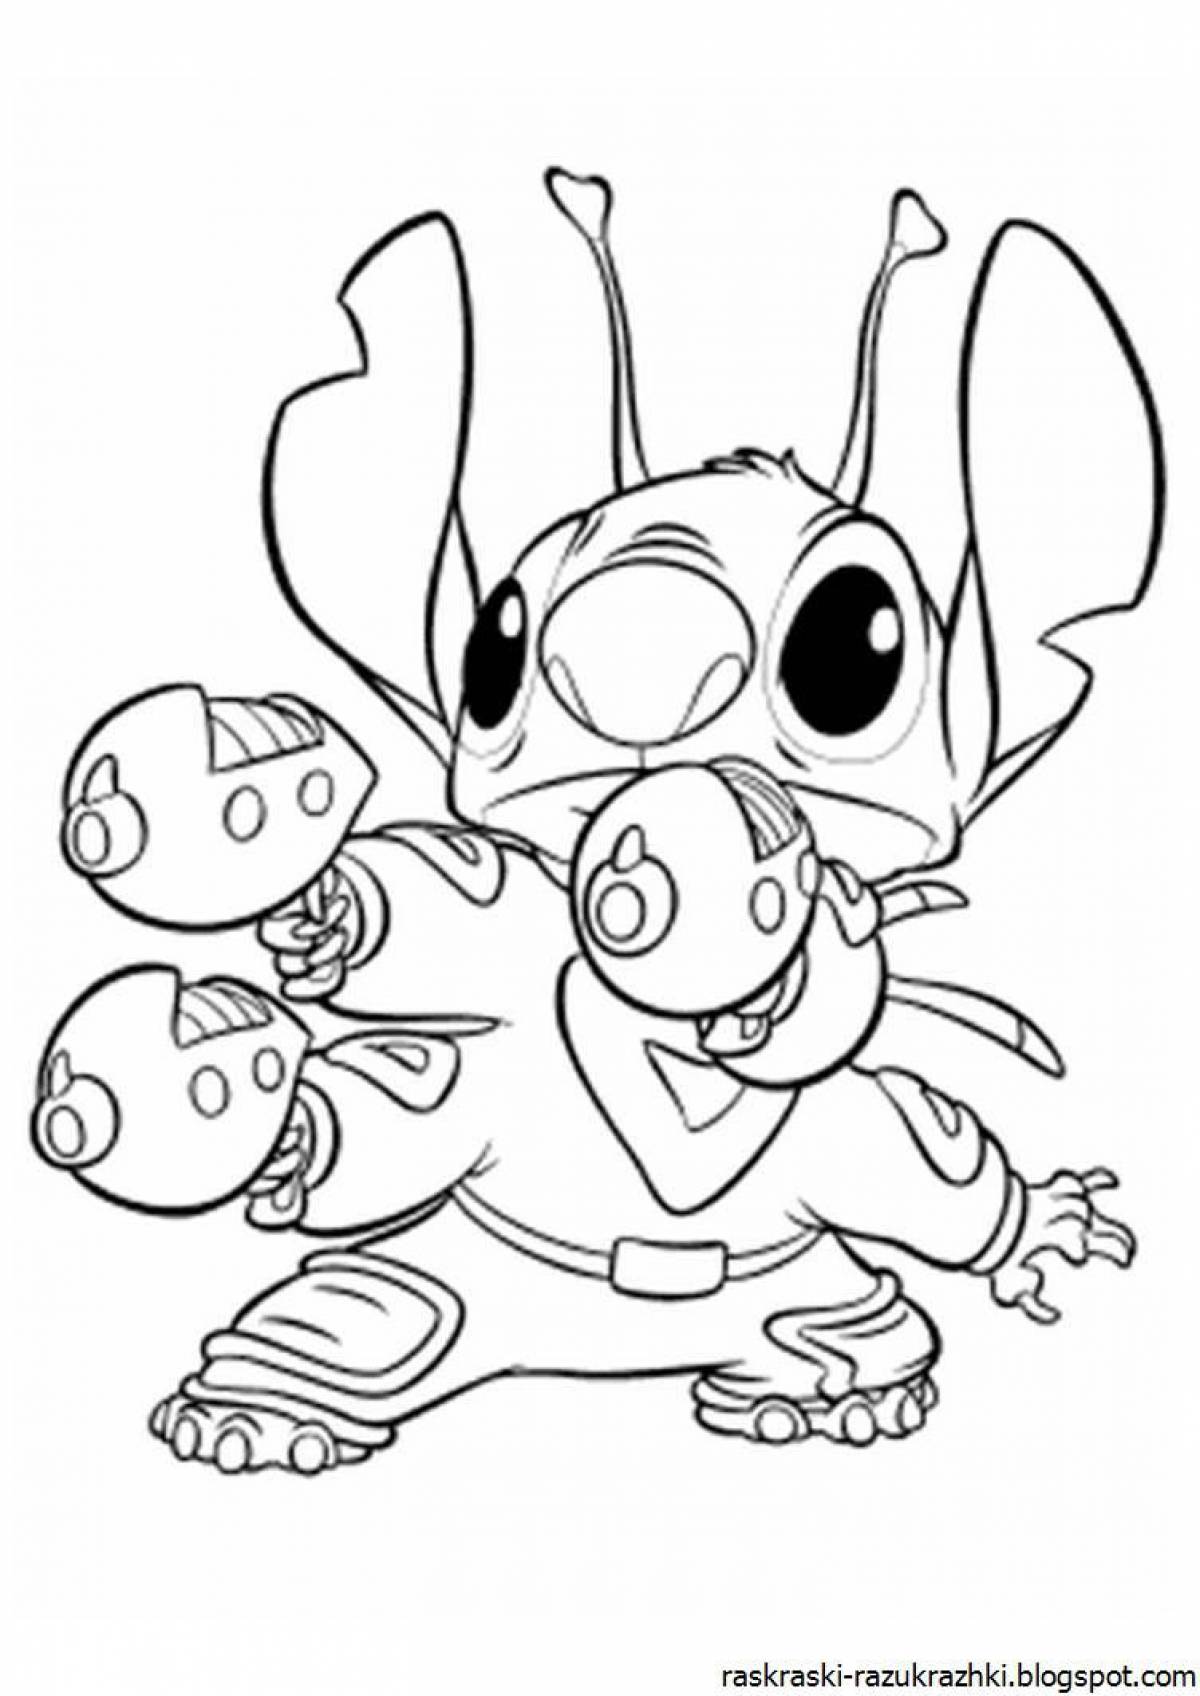 Flickering stitch coloring page